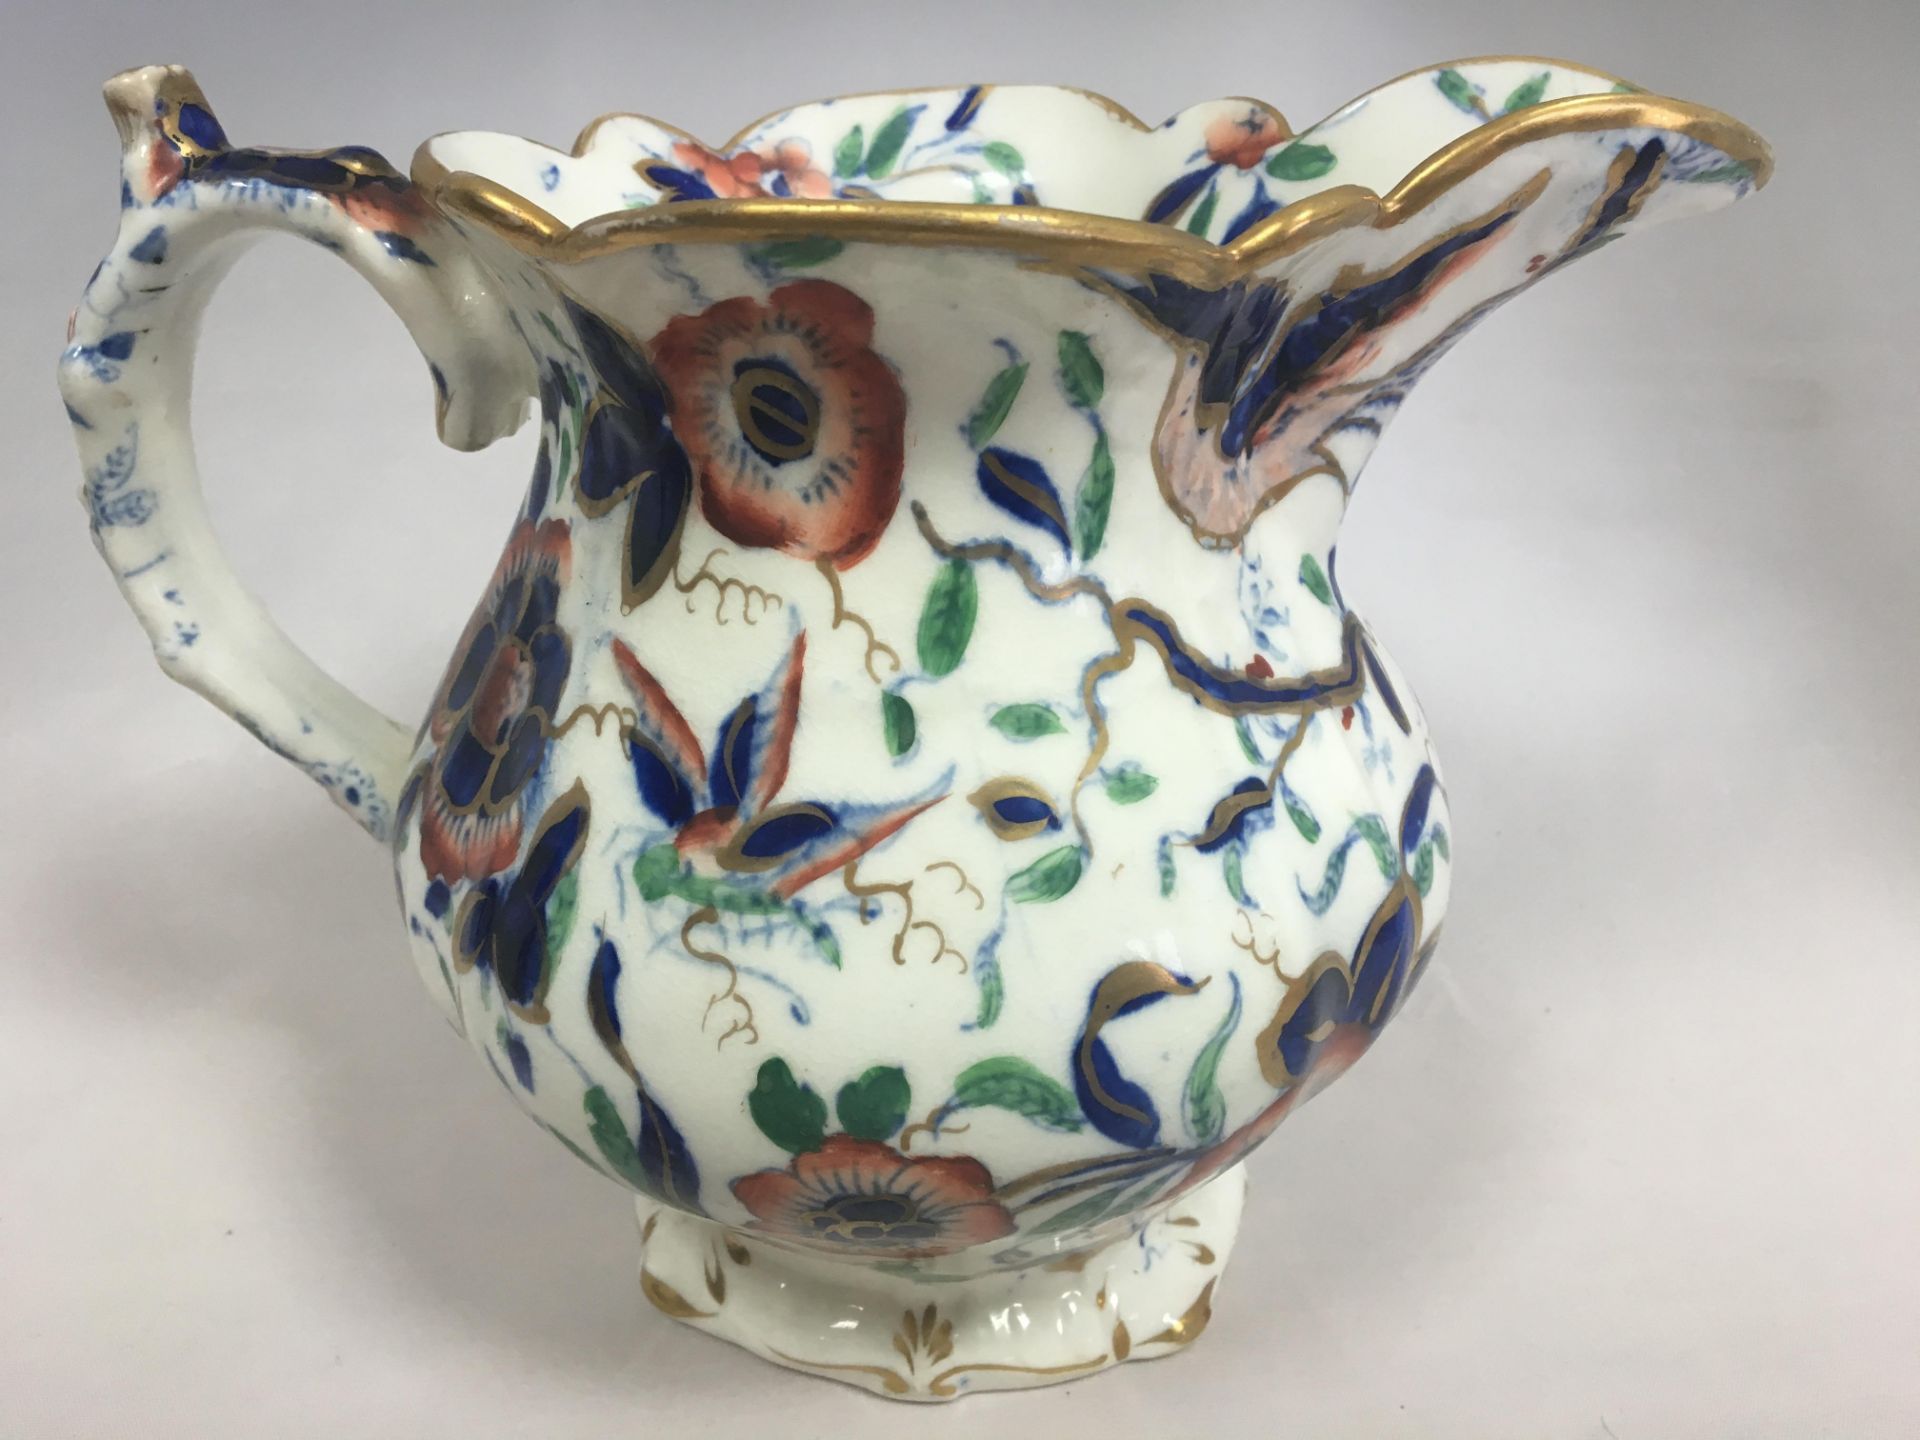 A 19TH CENTURY STAFFORDSHIRE IMARI JUG. HANDPAINTED WITH GILT EDGING. FREE UK DELIVERY.